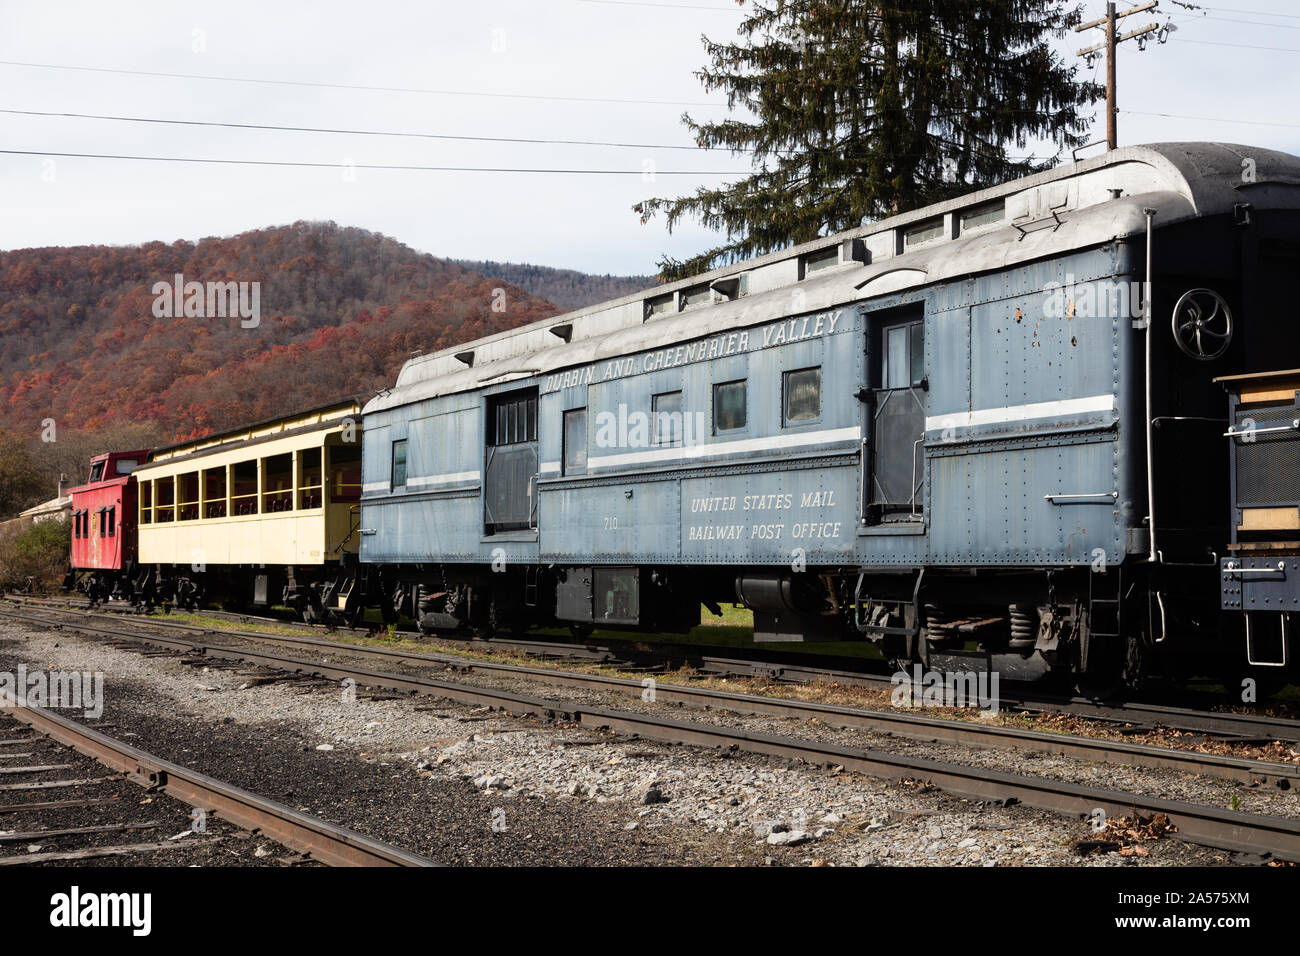 Vintage railroad cars belonging to the Durbin and Greenbrier Valley excursion railroad, outside the depot in the tiny settlement of Durbin, near the headwaters of the Greenbrier River in Pocahontas County, West Virginia Stock Photo